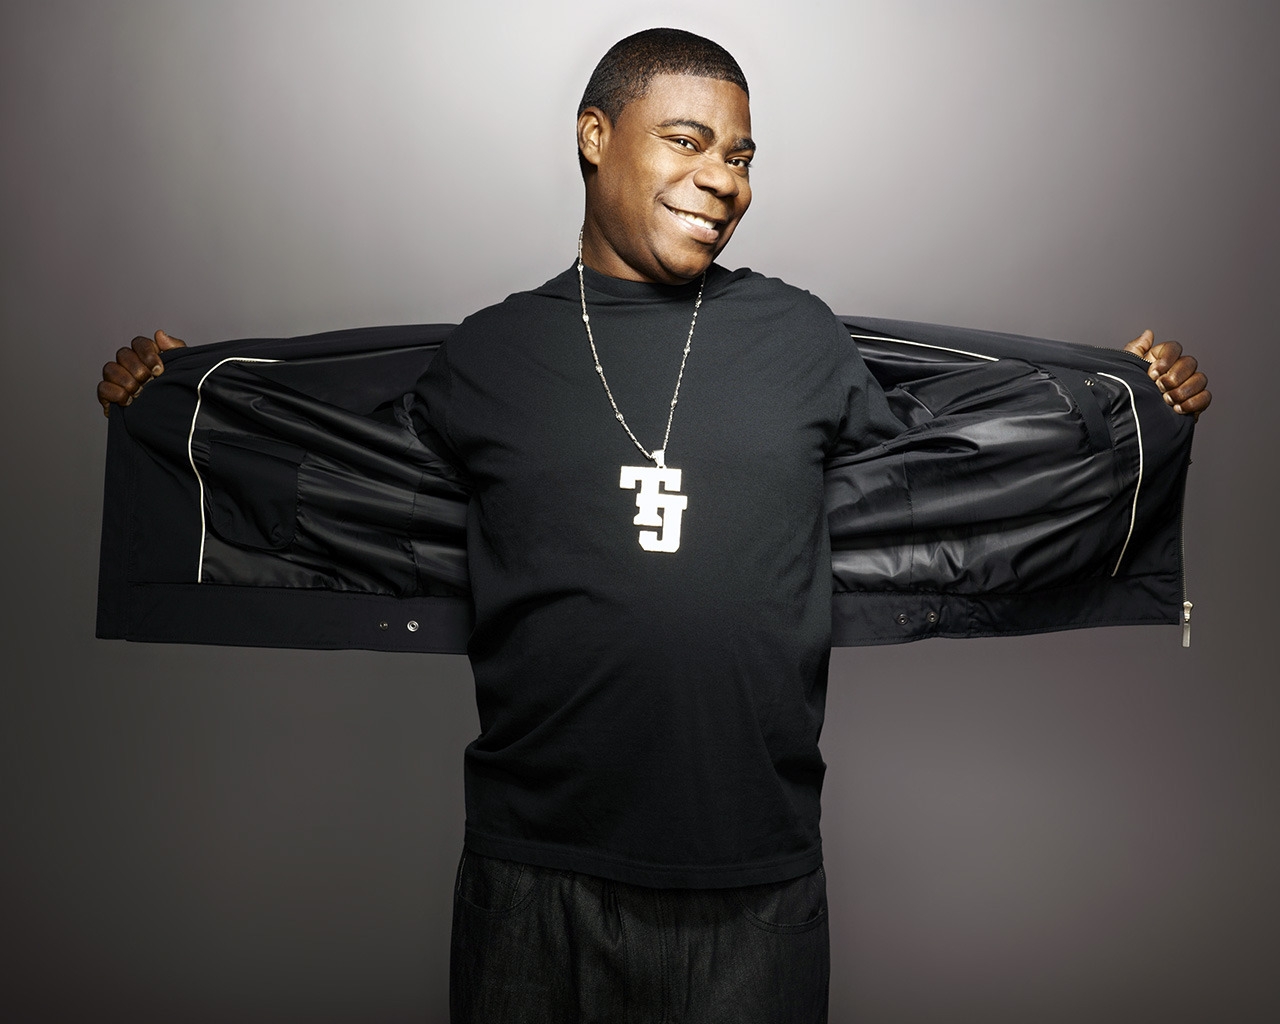 Tracy Morgan for 1280 x 1024 resolution